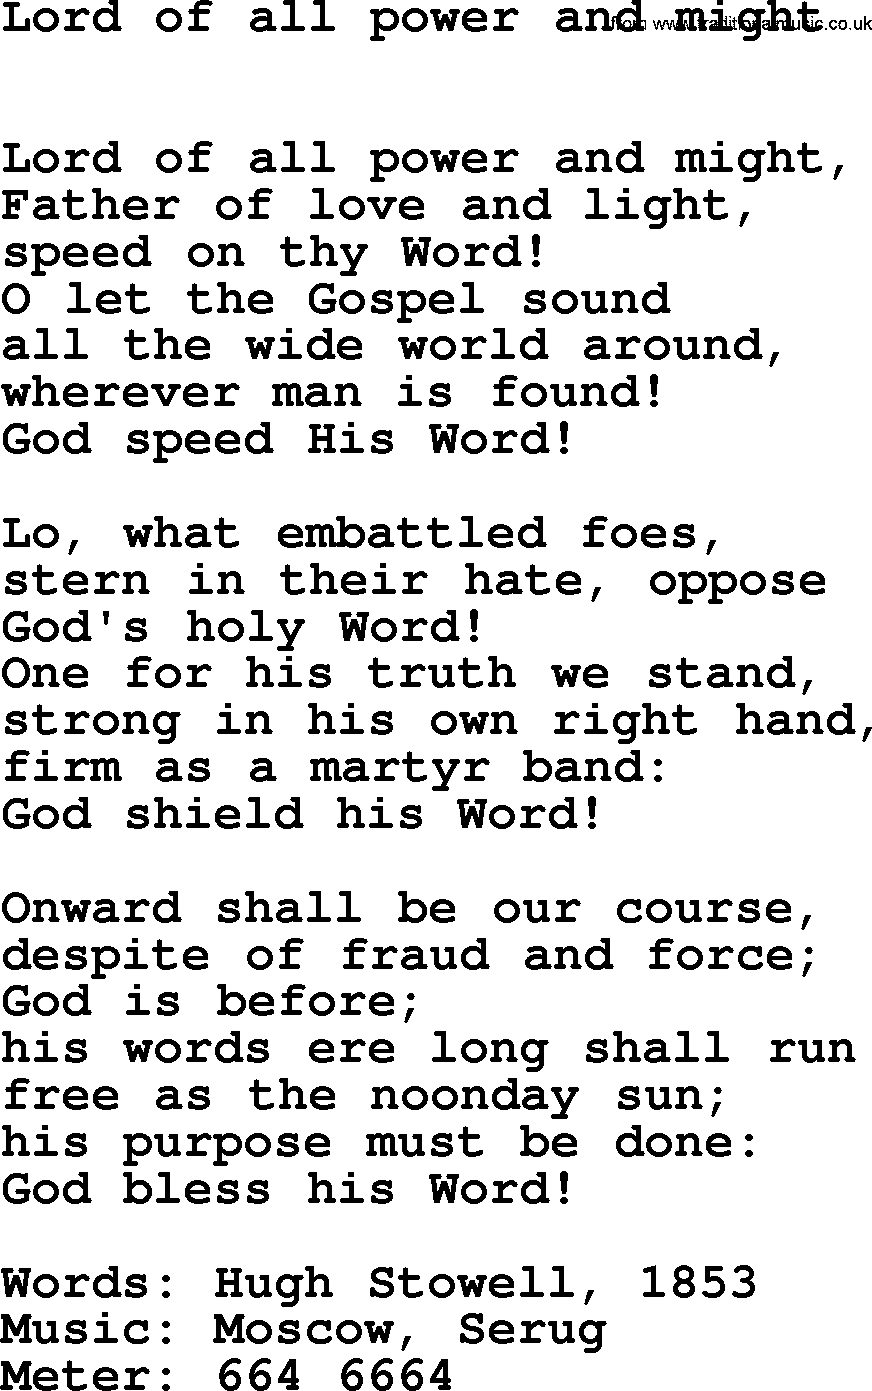 Book of Common Praise Hymn: Lord Of All Power And Might.txt lyrics with midi music